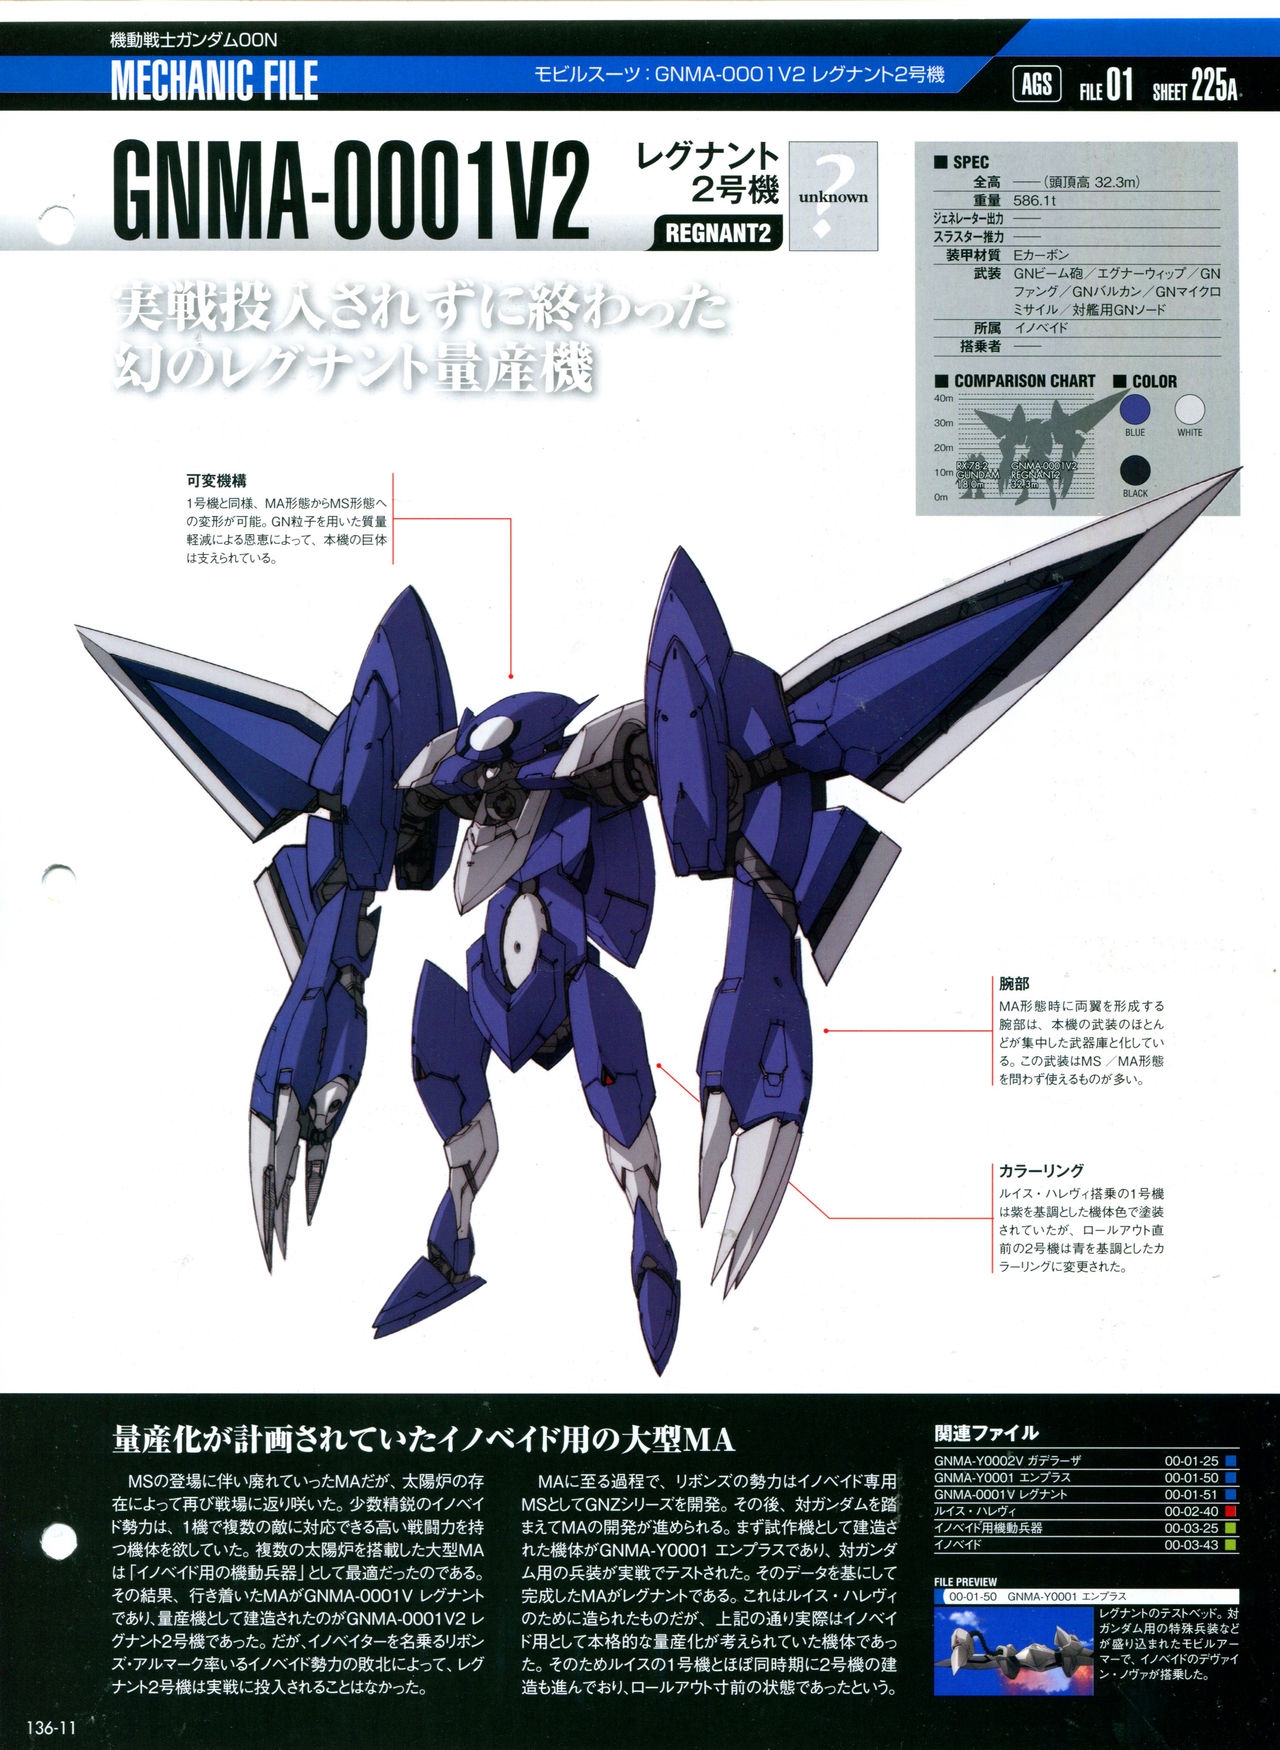 The Official Gundam Perfect File No.136 14